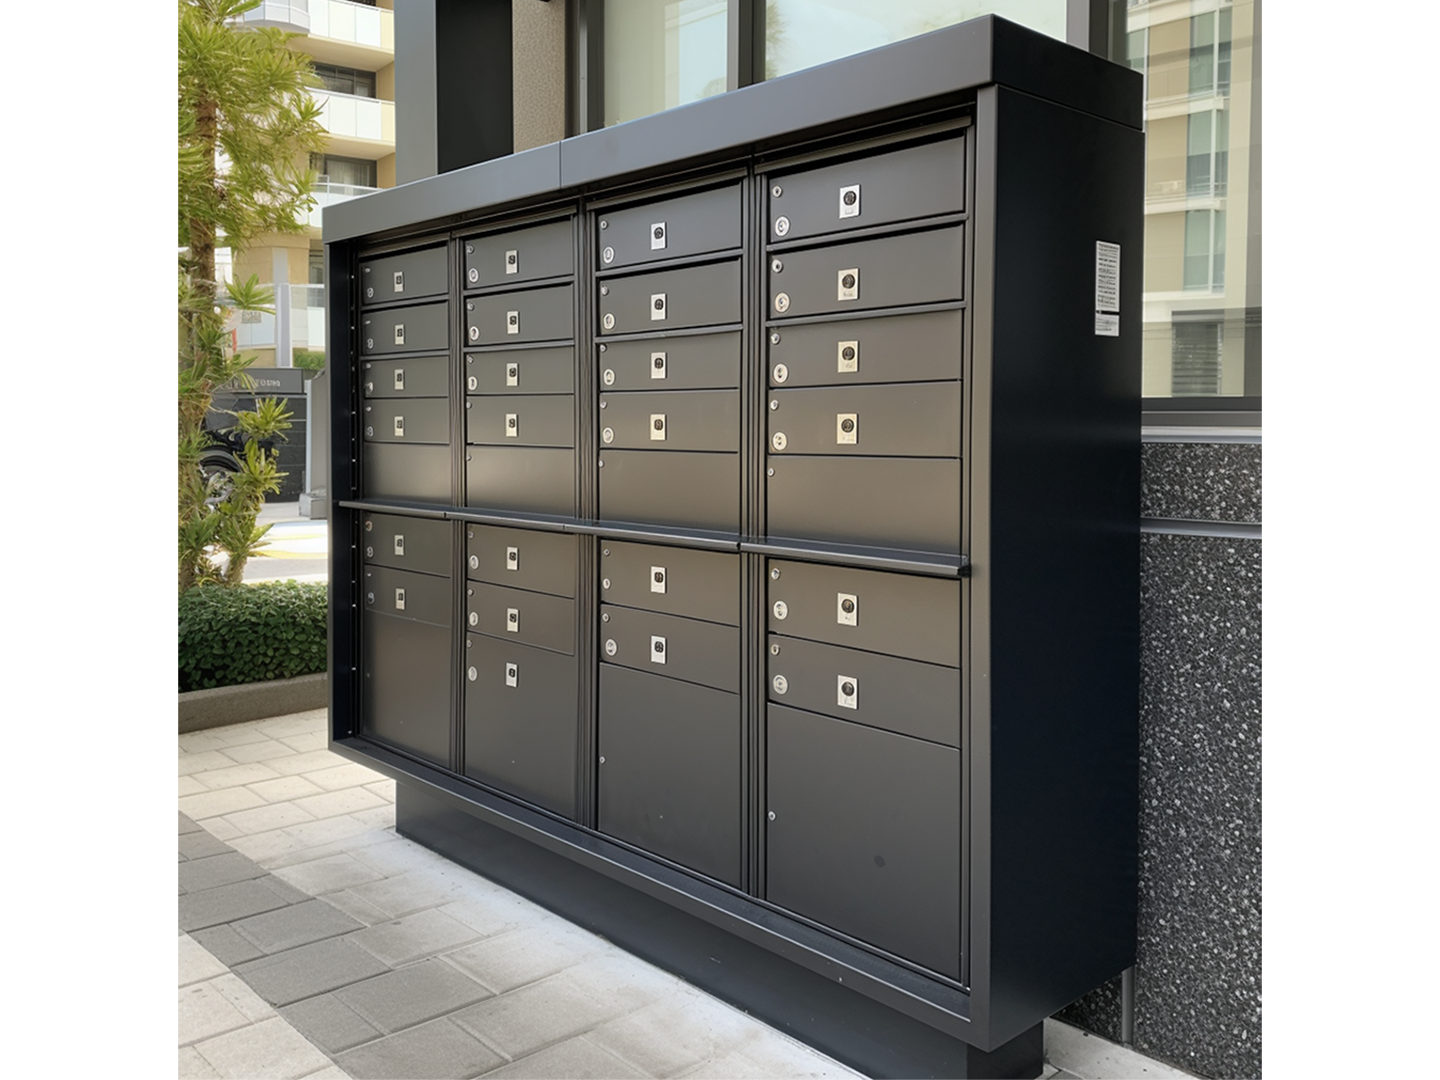 Community Mailbox - Outdoor Mailbox - Outdoor Mailbox for Apartments